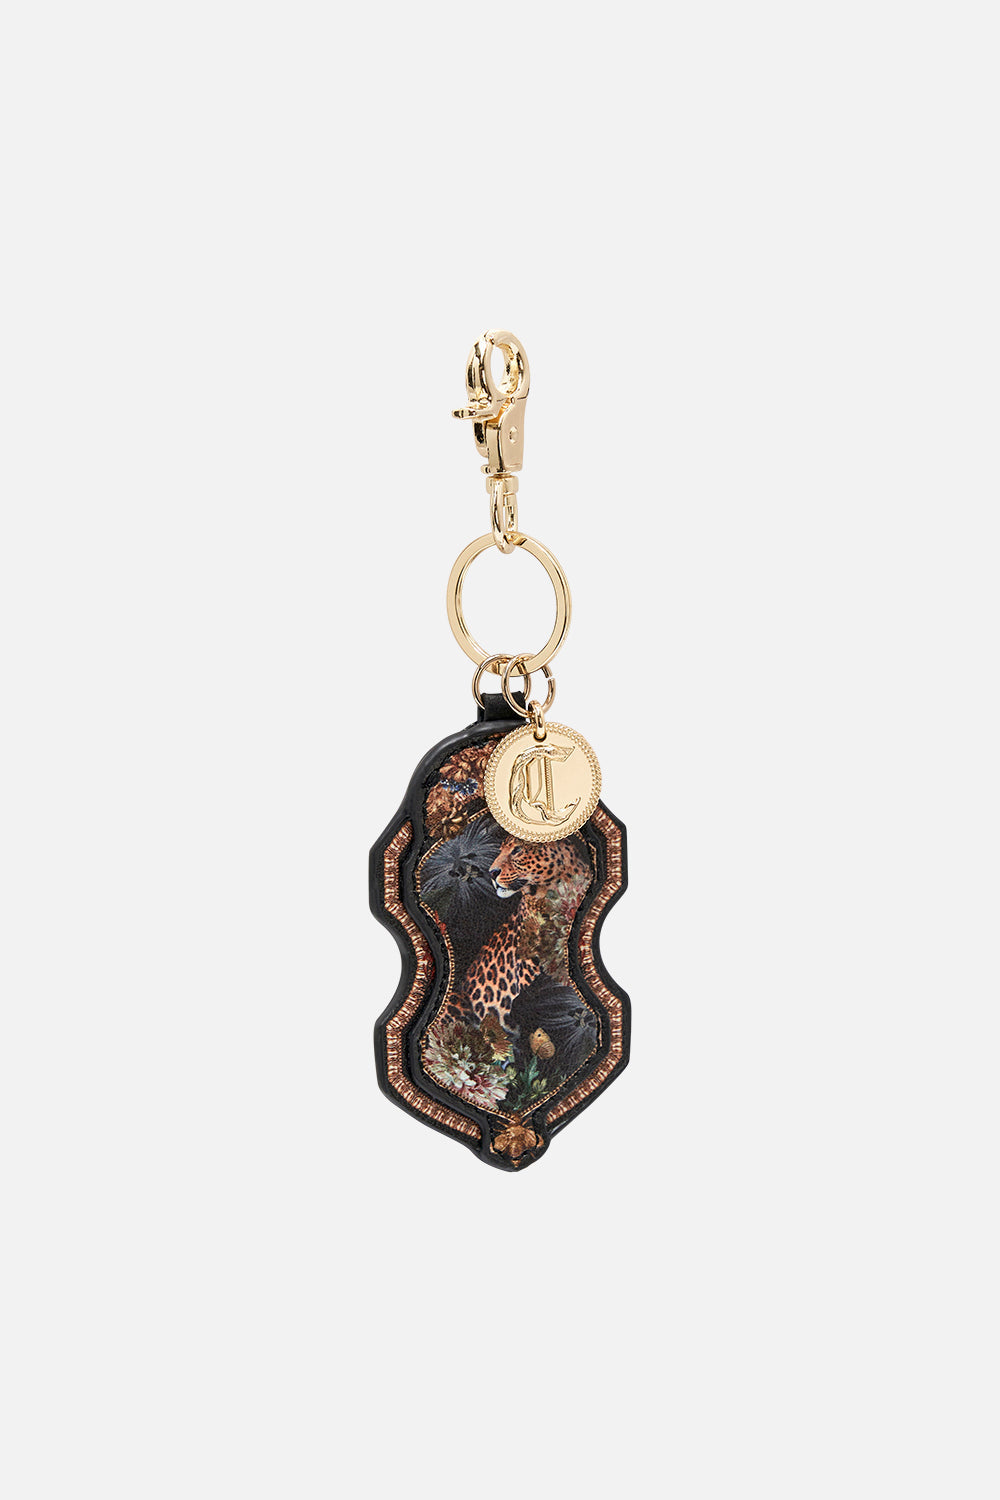 Product view of CAMILLA keyring in A Night At The Opera print